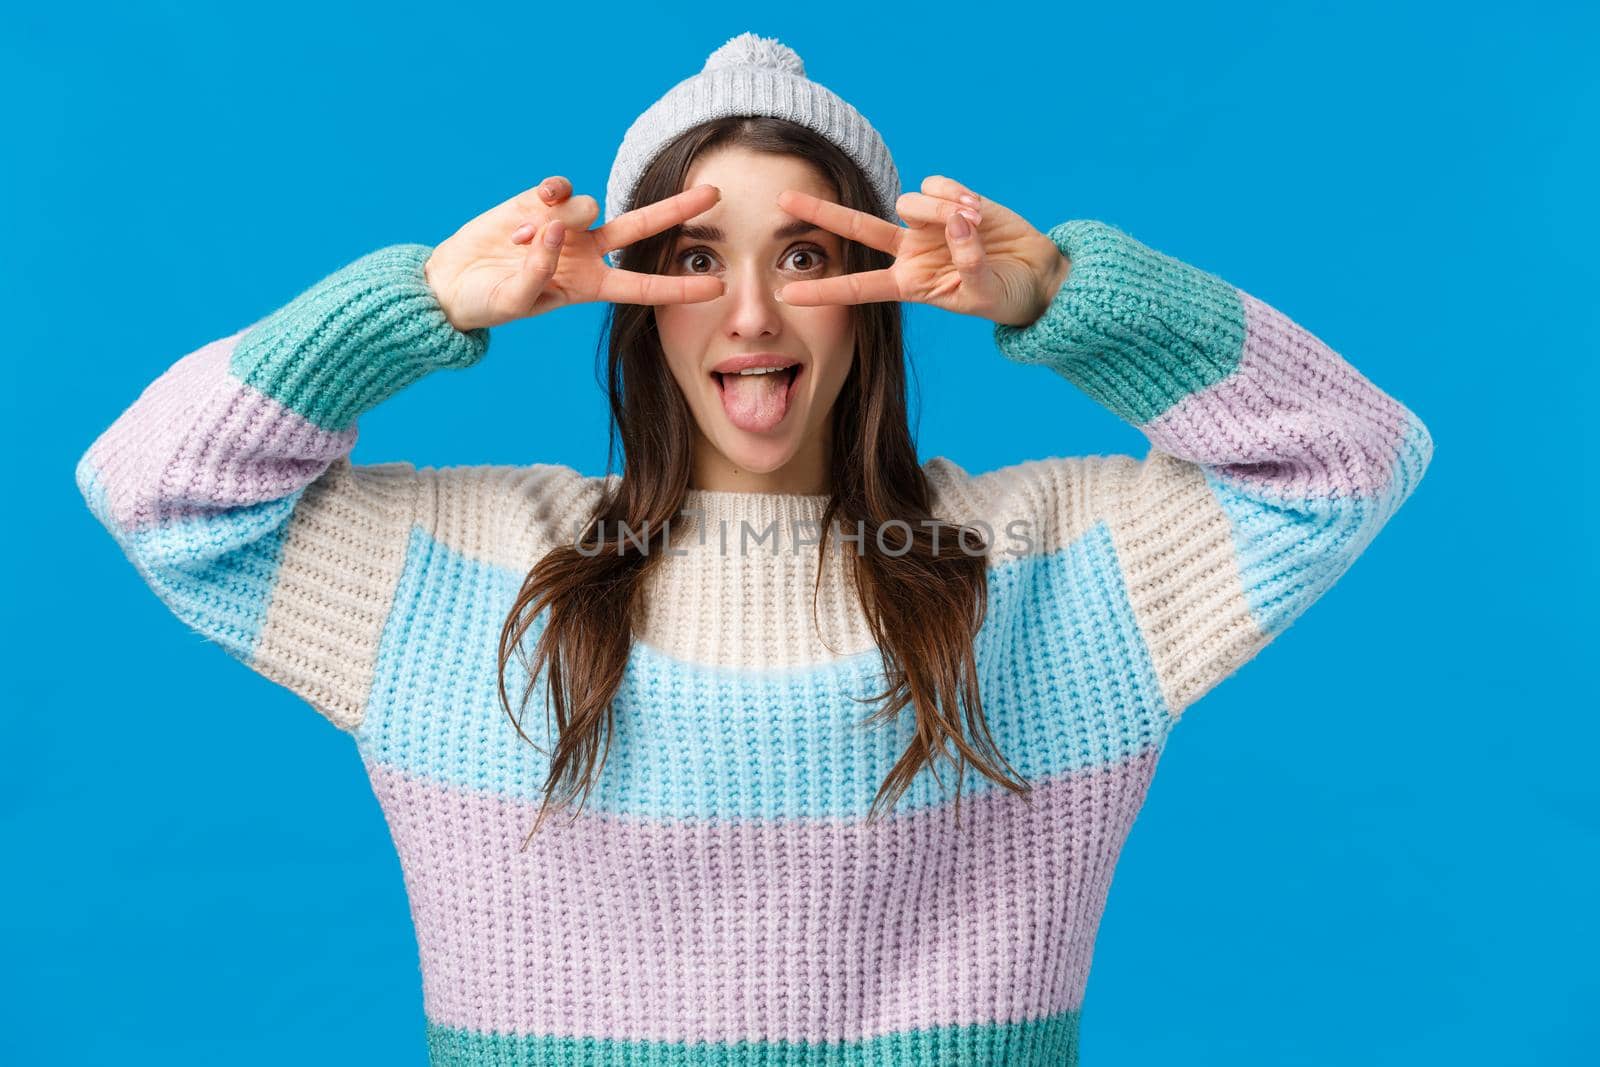 Be yourself. Attractive and playful funny, beautiful caucasian girl in winter hat, sweater, showing tongue and make disco, peace signs over eyes, having fun on christmas holidays, blue background.